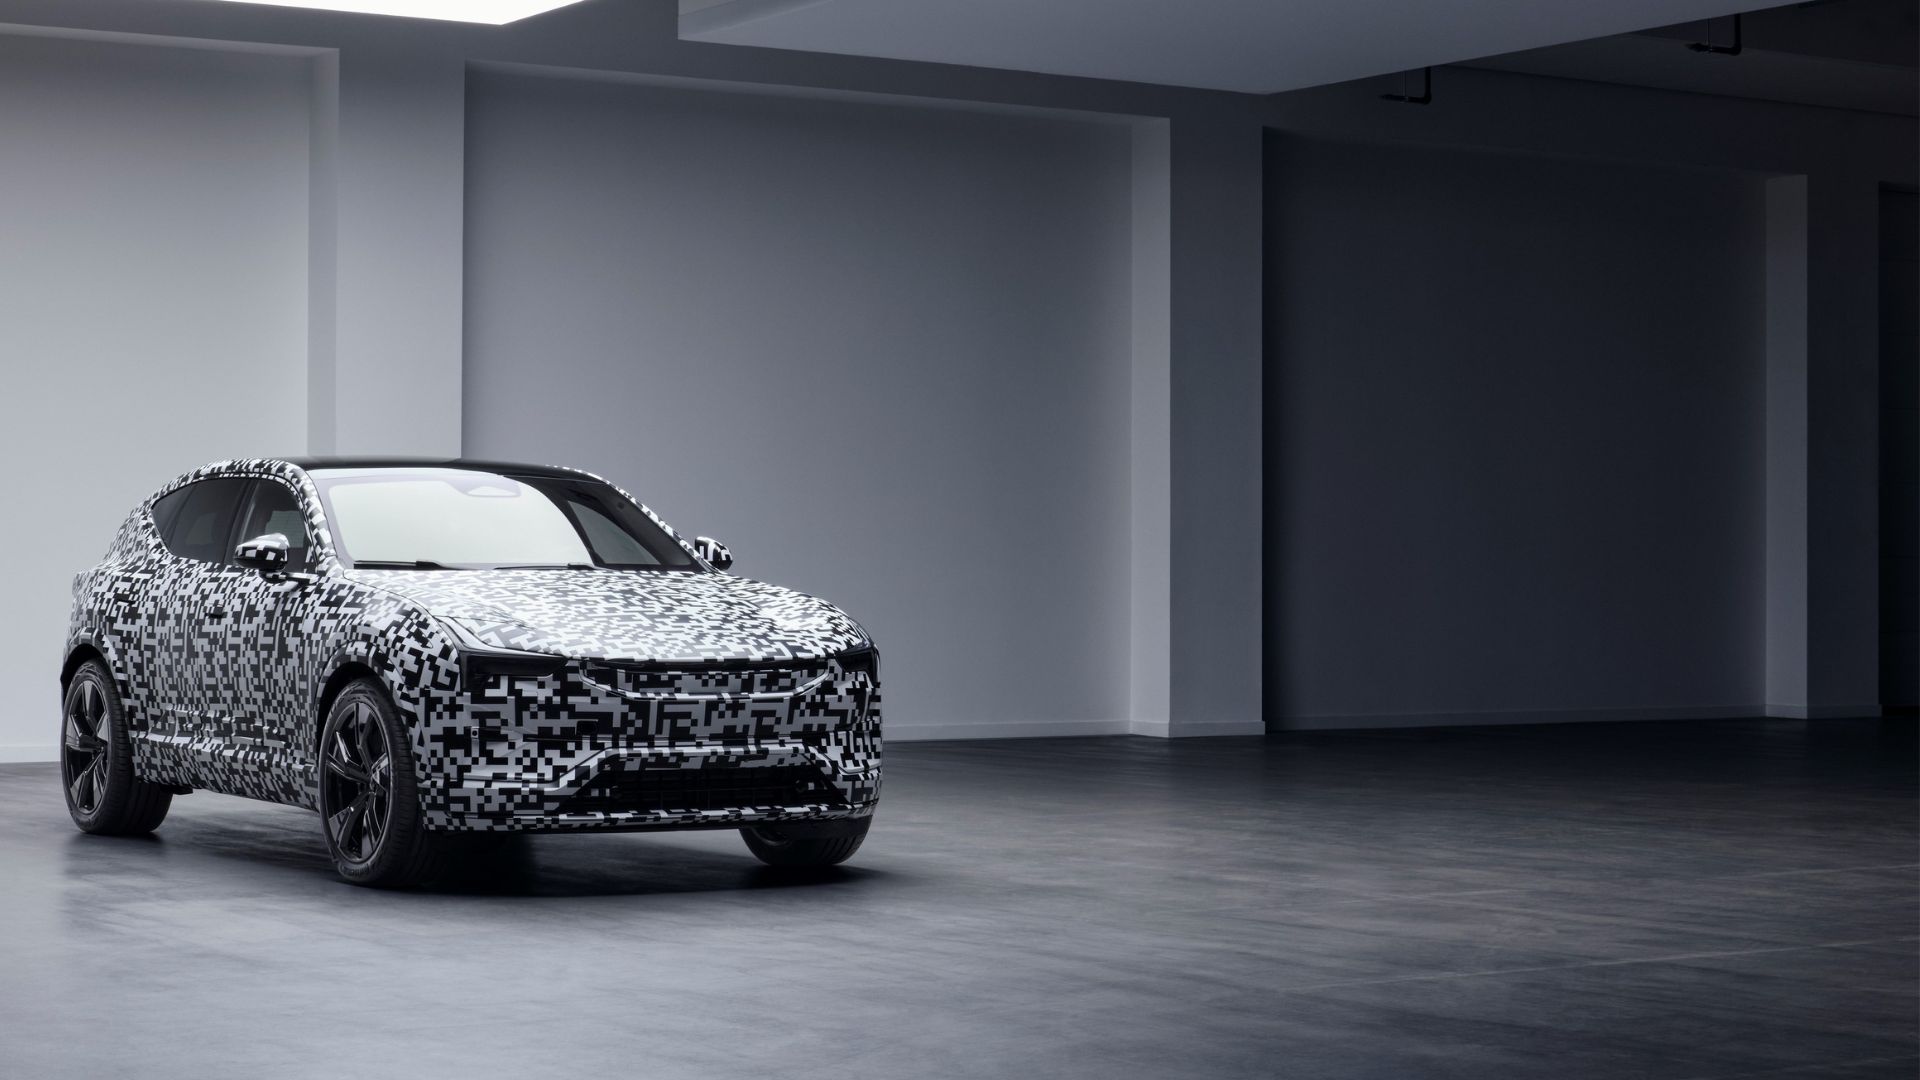 https://e-vehicleinfo.com/2023-polestar-3-electric-suv-price-and-features/